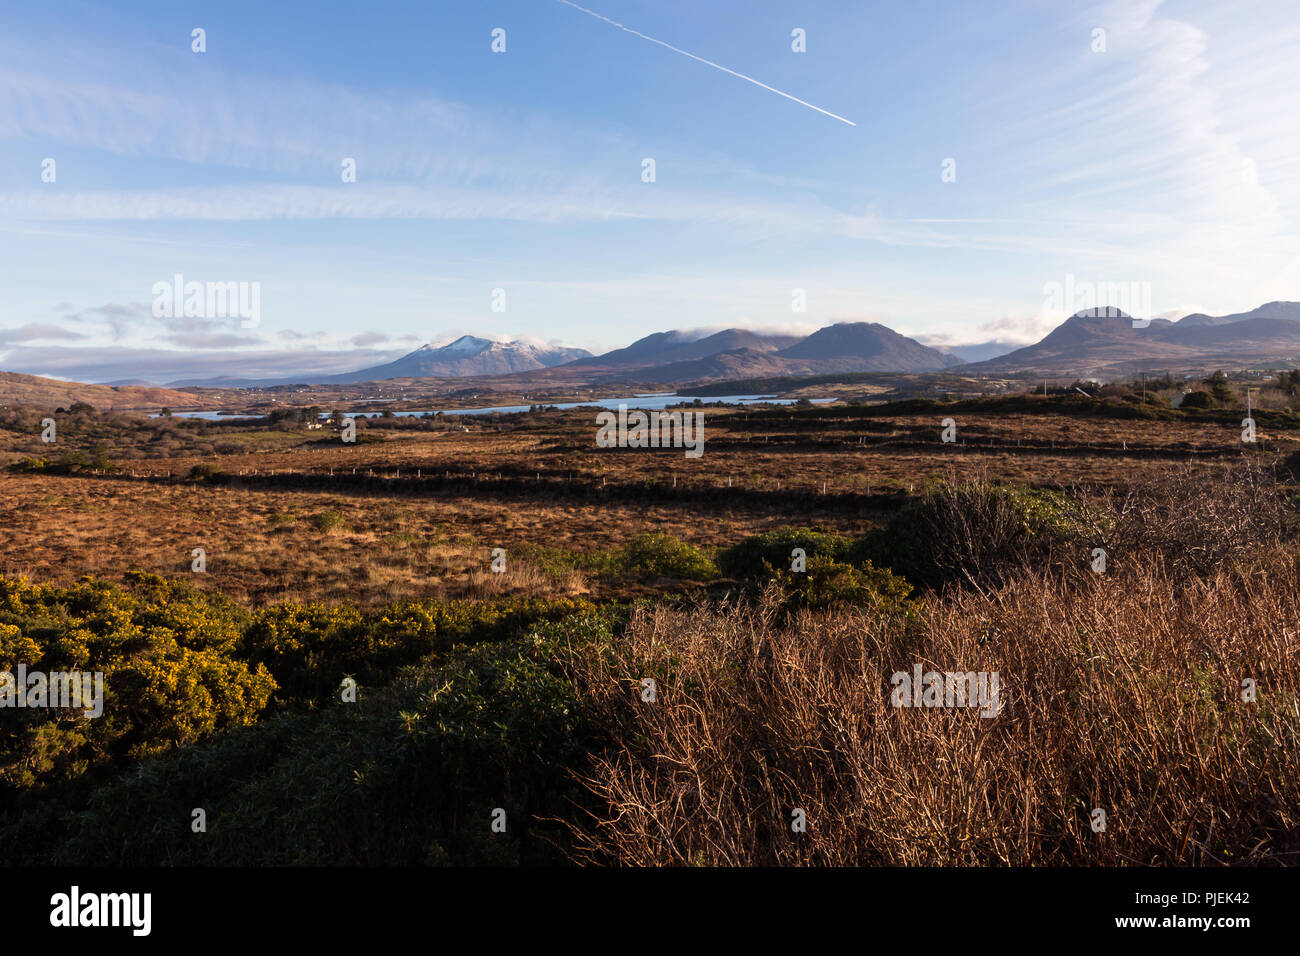 A Connemara country scene overlooking fields of heather to mountains, County Galway, Ireland. Stock Photo